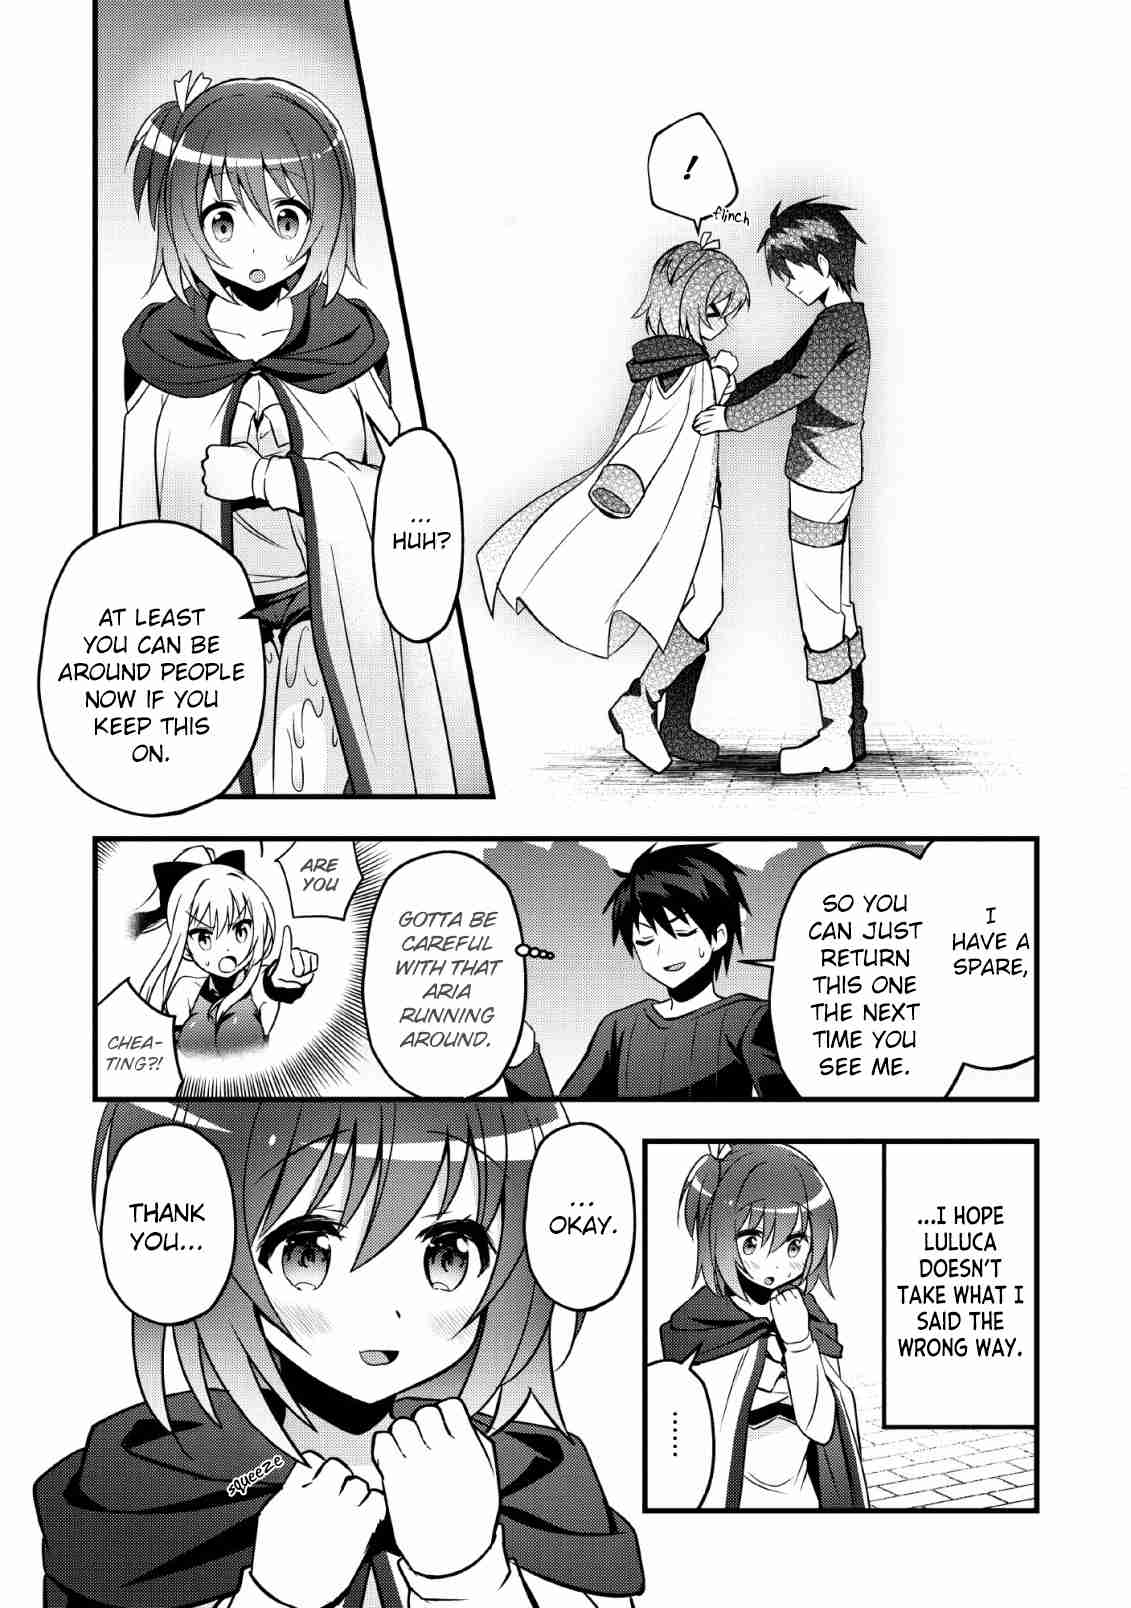 I Work As A Healer In Another World's Labyrinth City Vol. 3 Ch. 13